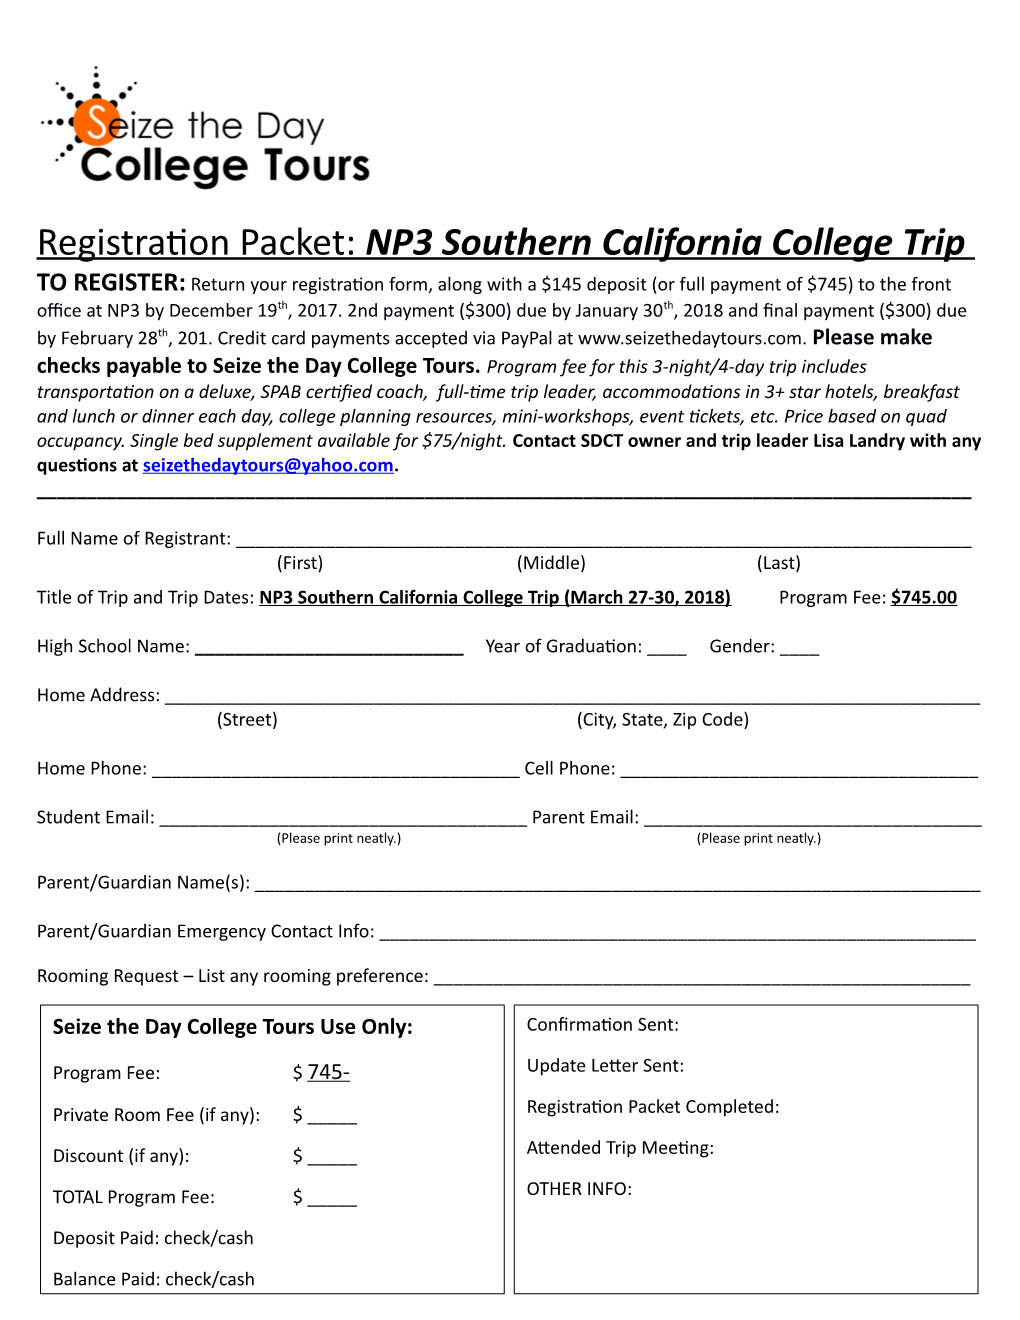 Registration Packet: NP3 Southern California College Trip